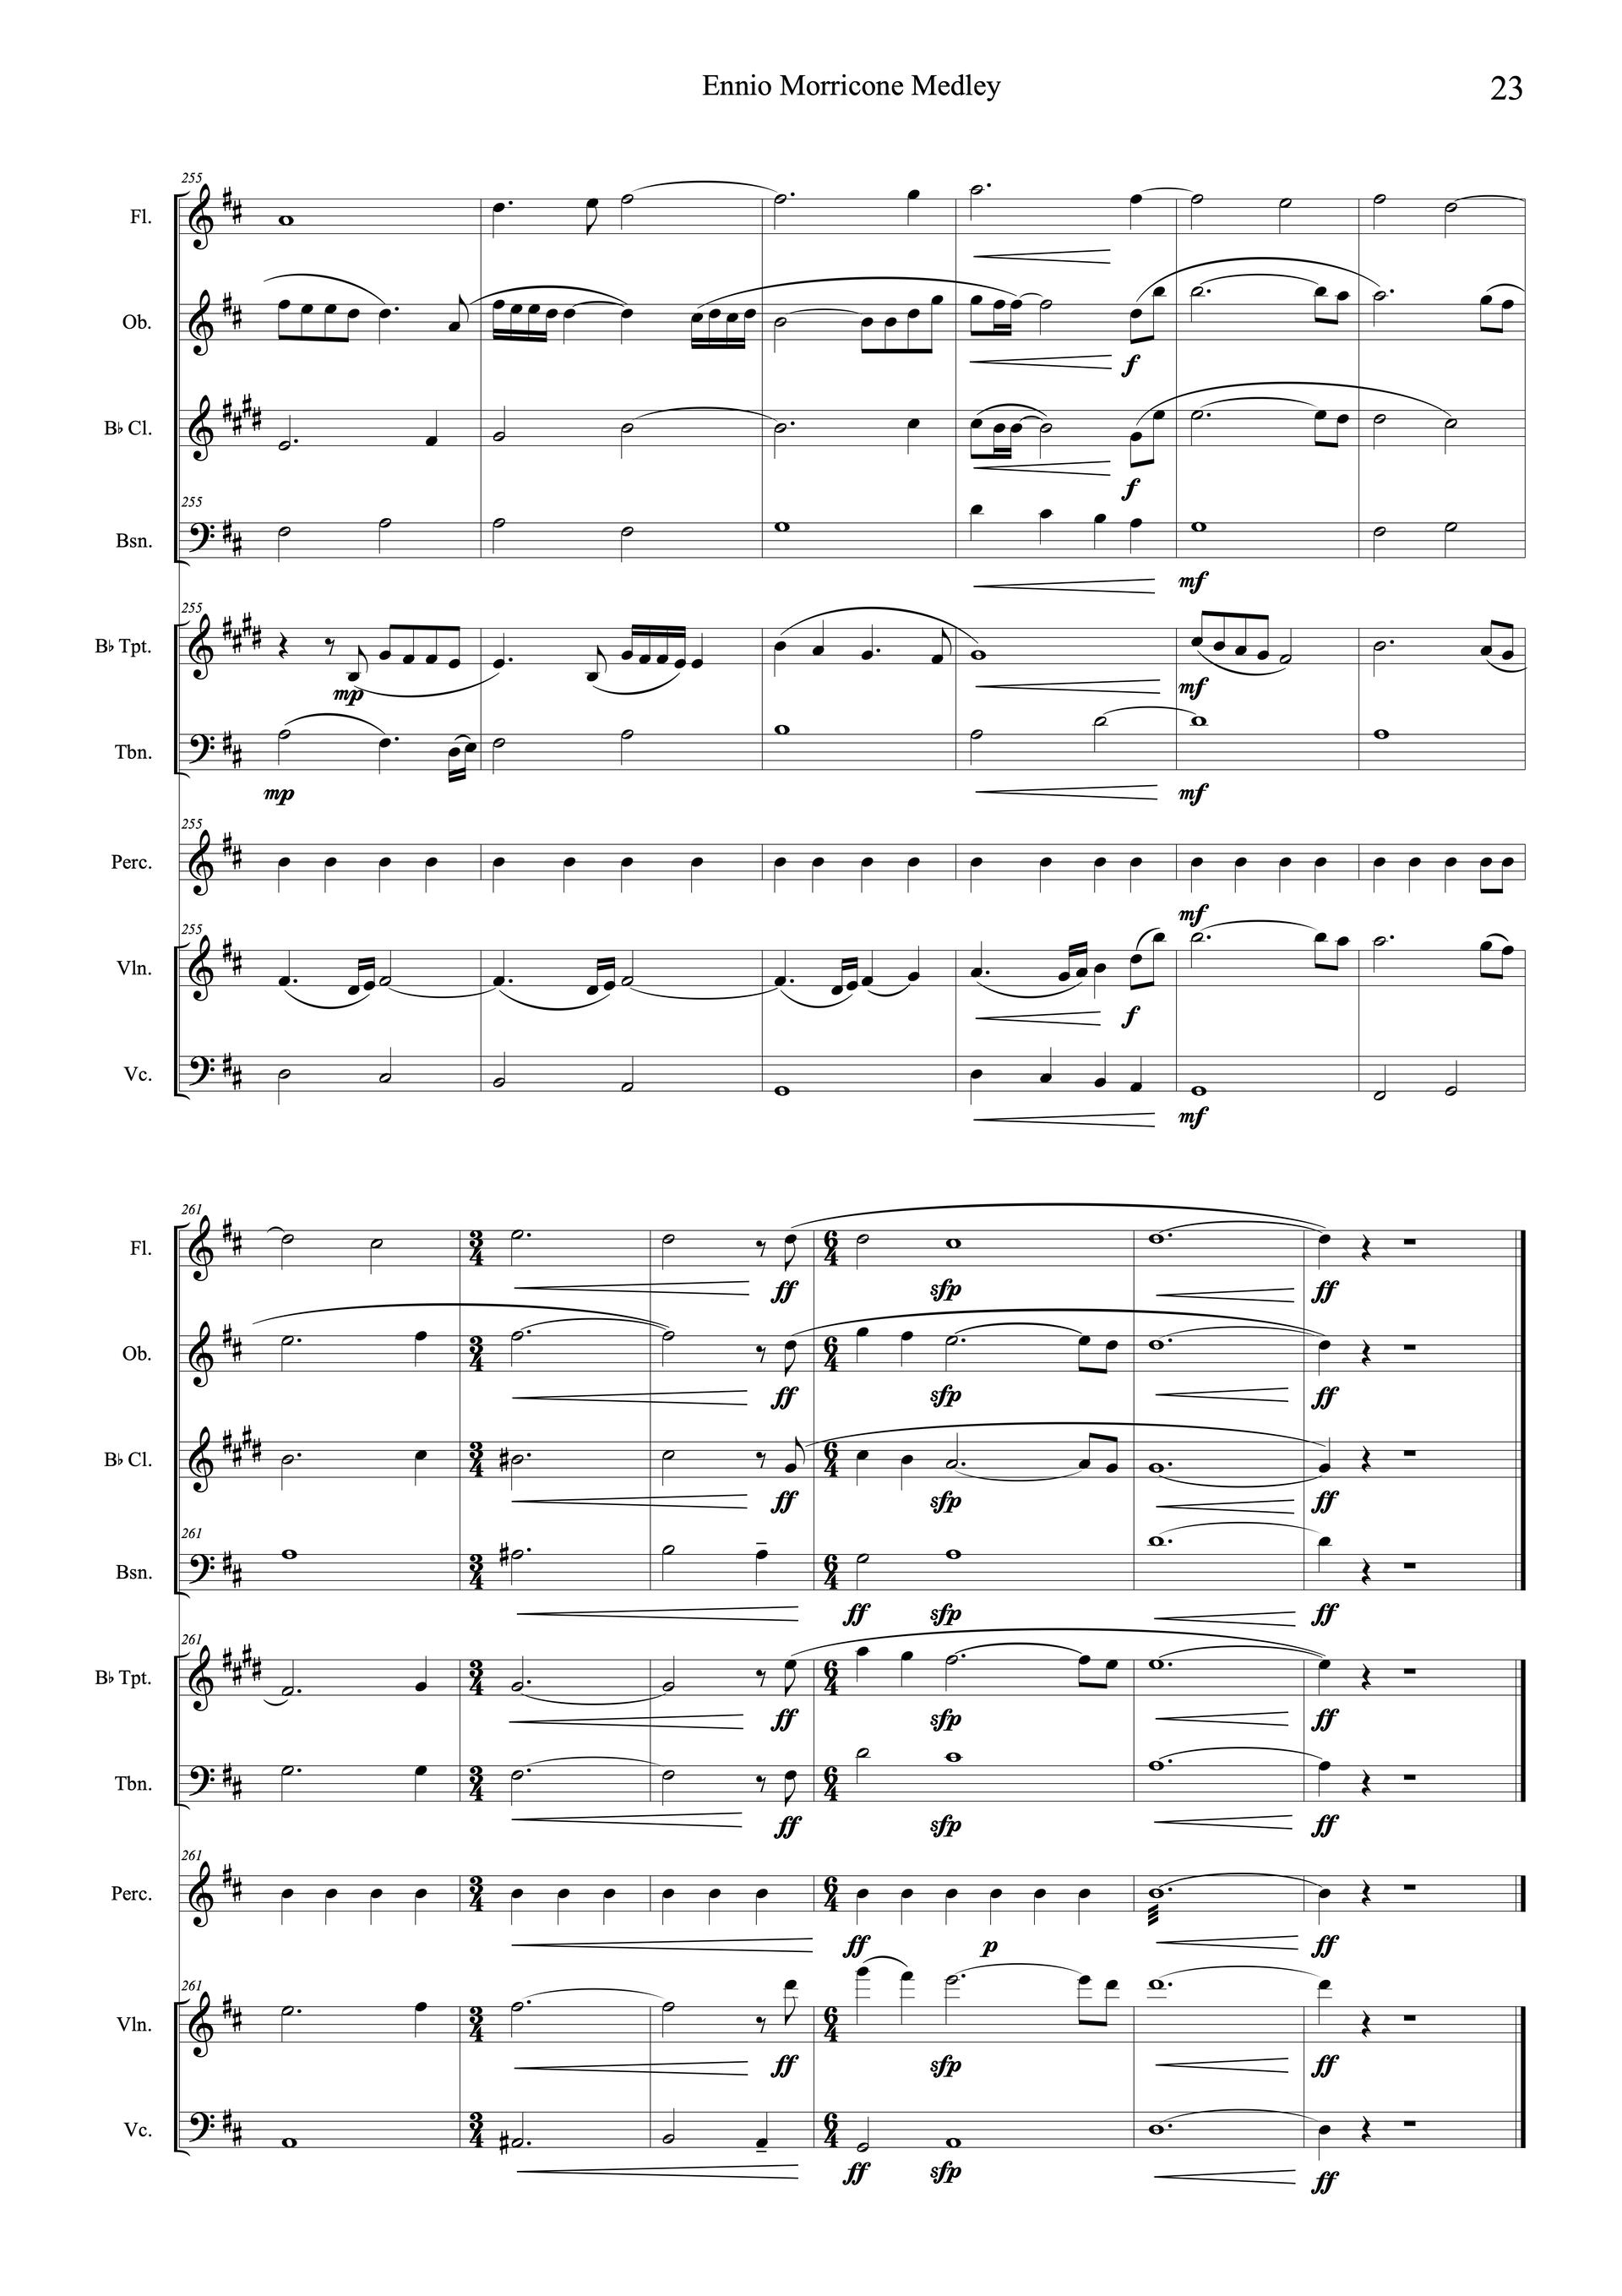 Sheet music of Ennio Morricone Medley arranged for chamber orchestra preview page 23